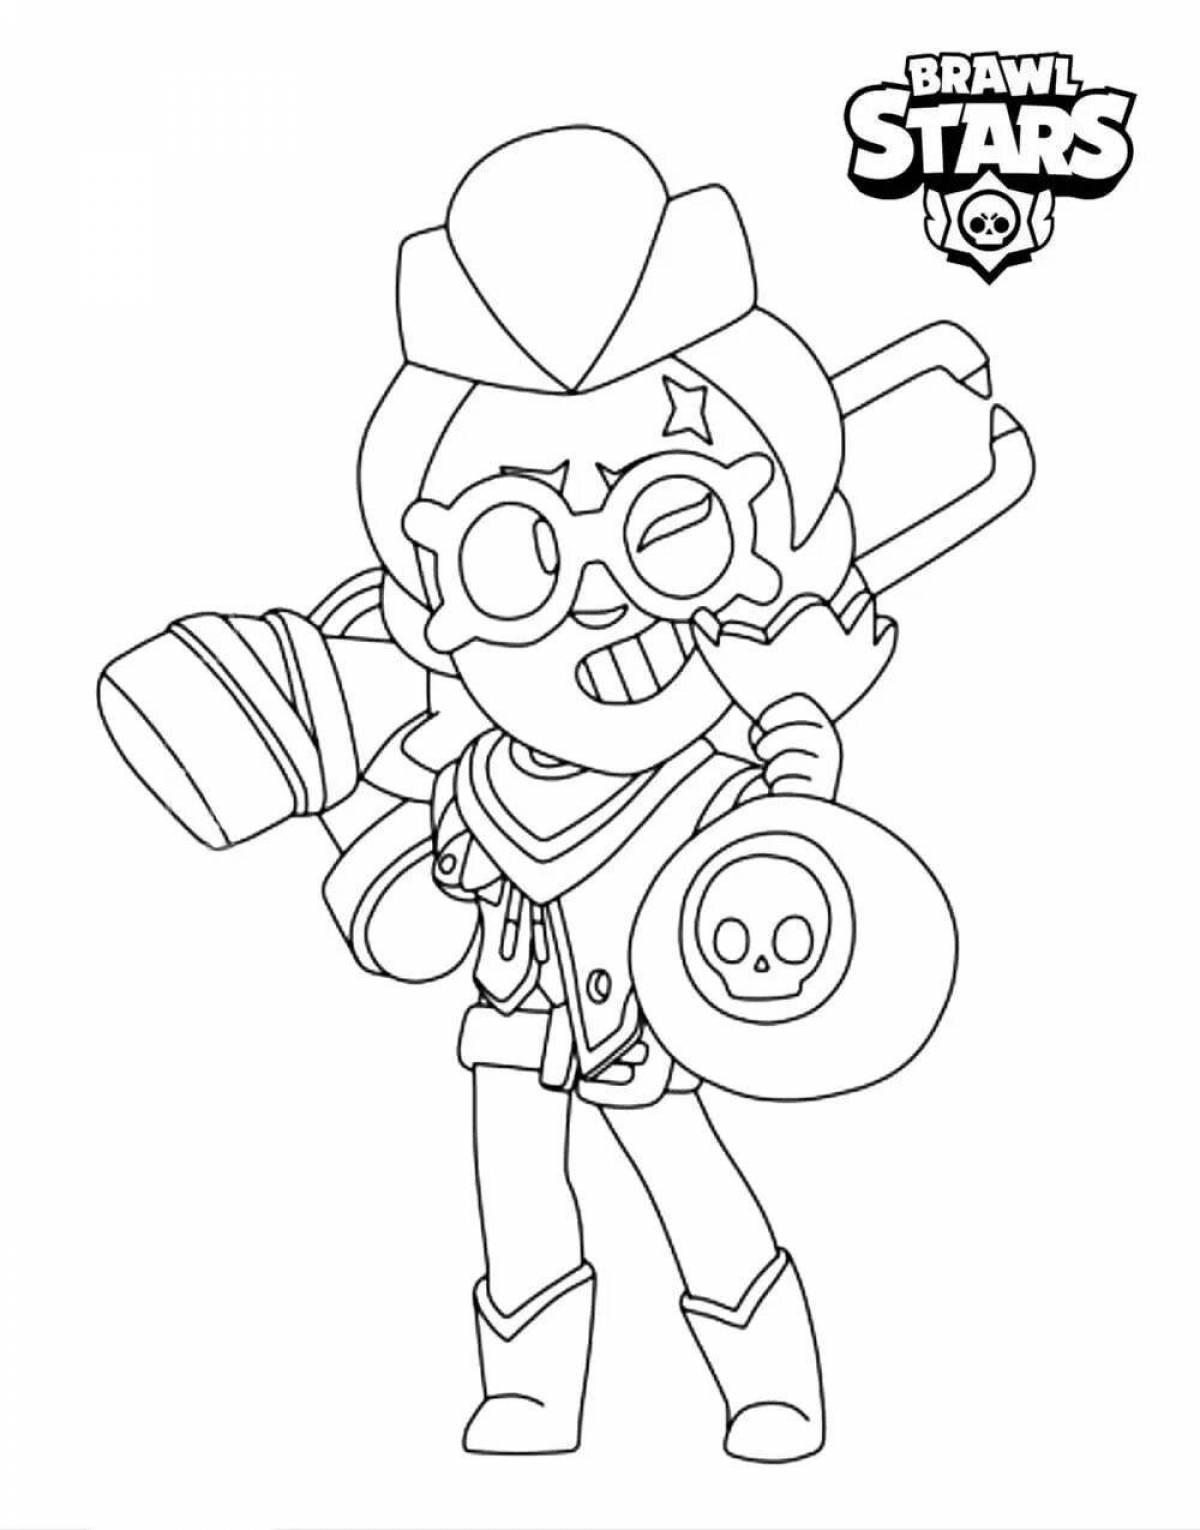 Adorable ball stars coloring page